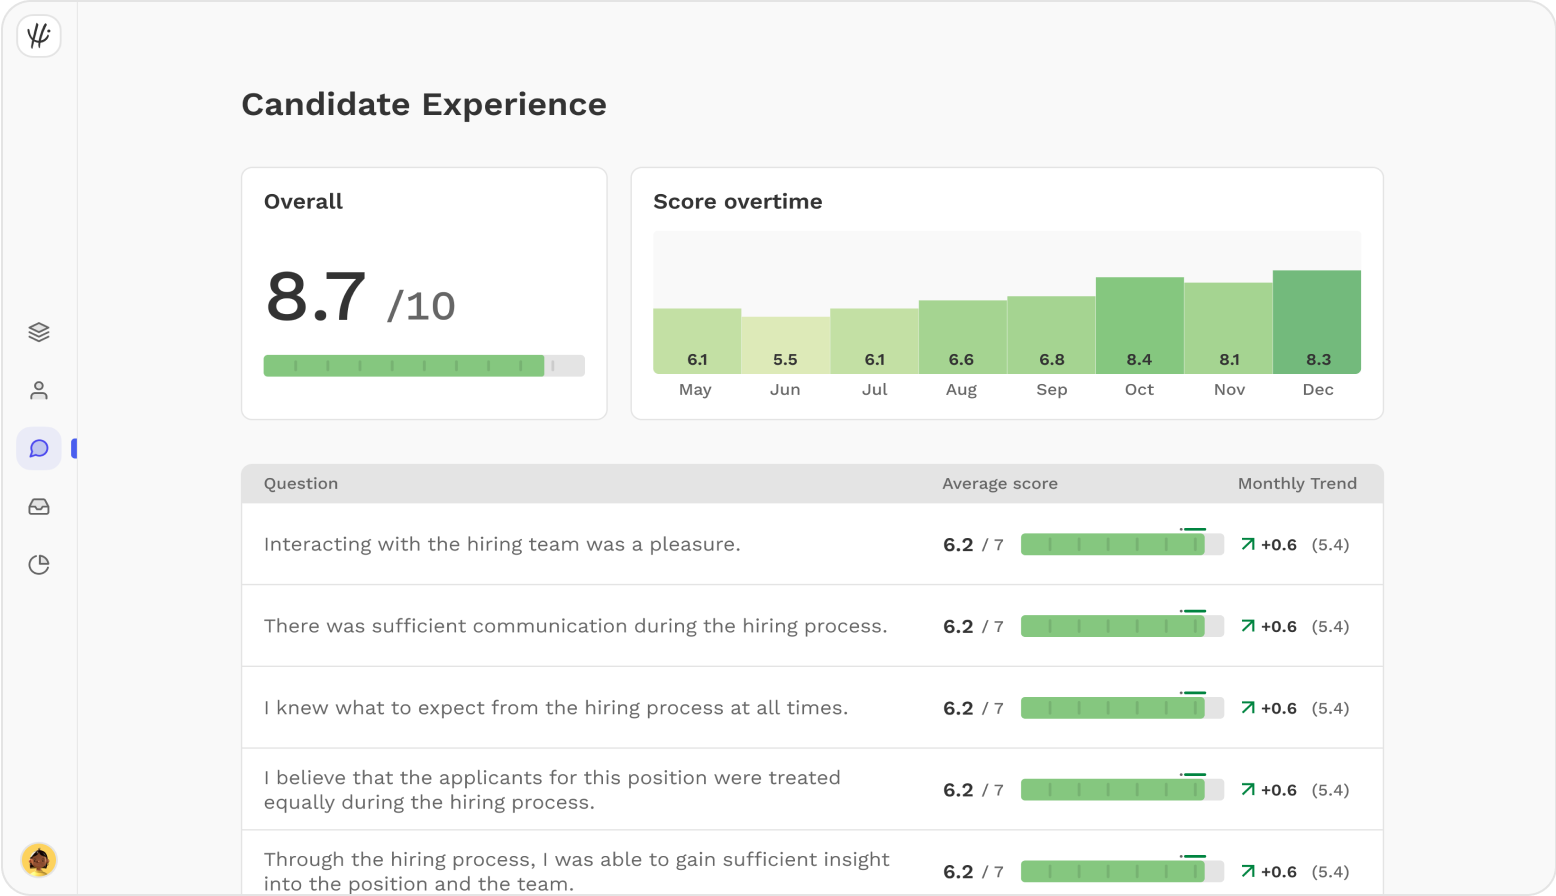 HiPeople Software - Gather feedback effortlessly and measure your candidates’ experience. It’s never been easier to understand what drives candidate experience and make data-driven improvements to your recruitment process.